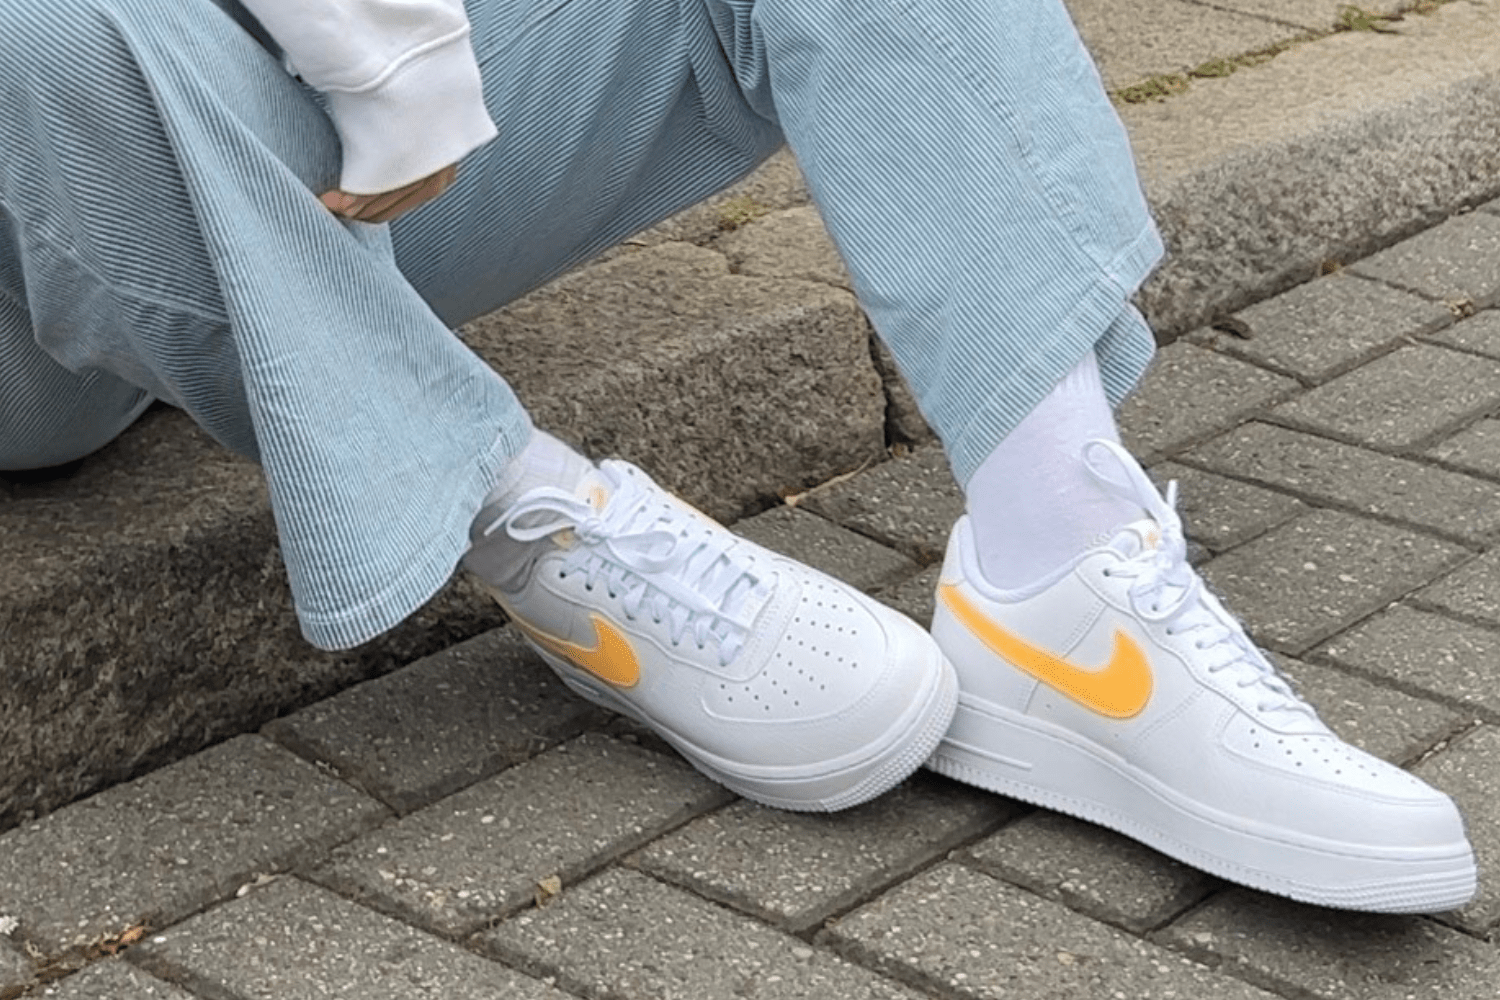 The Nike Air Force 1 '07 WMNS 'Melon Tint' brings Summer vibes to your outfit